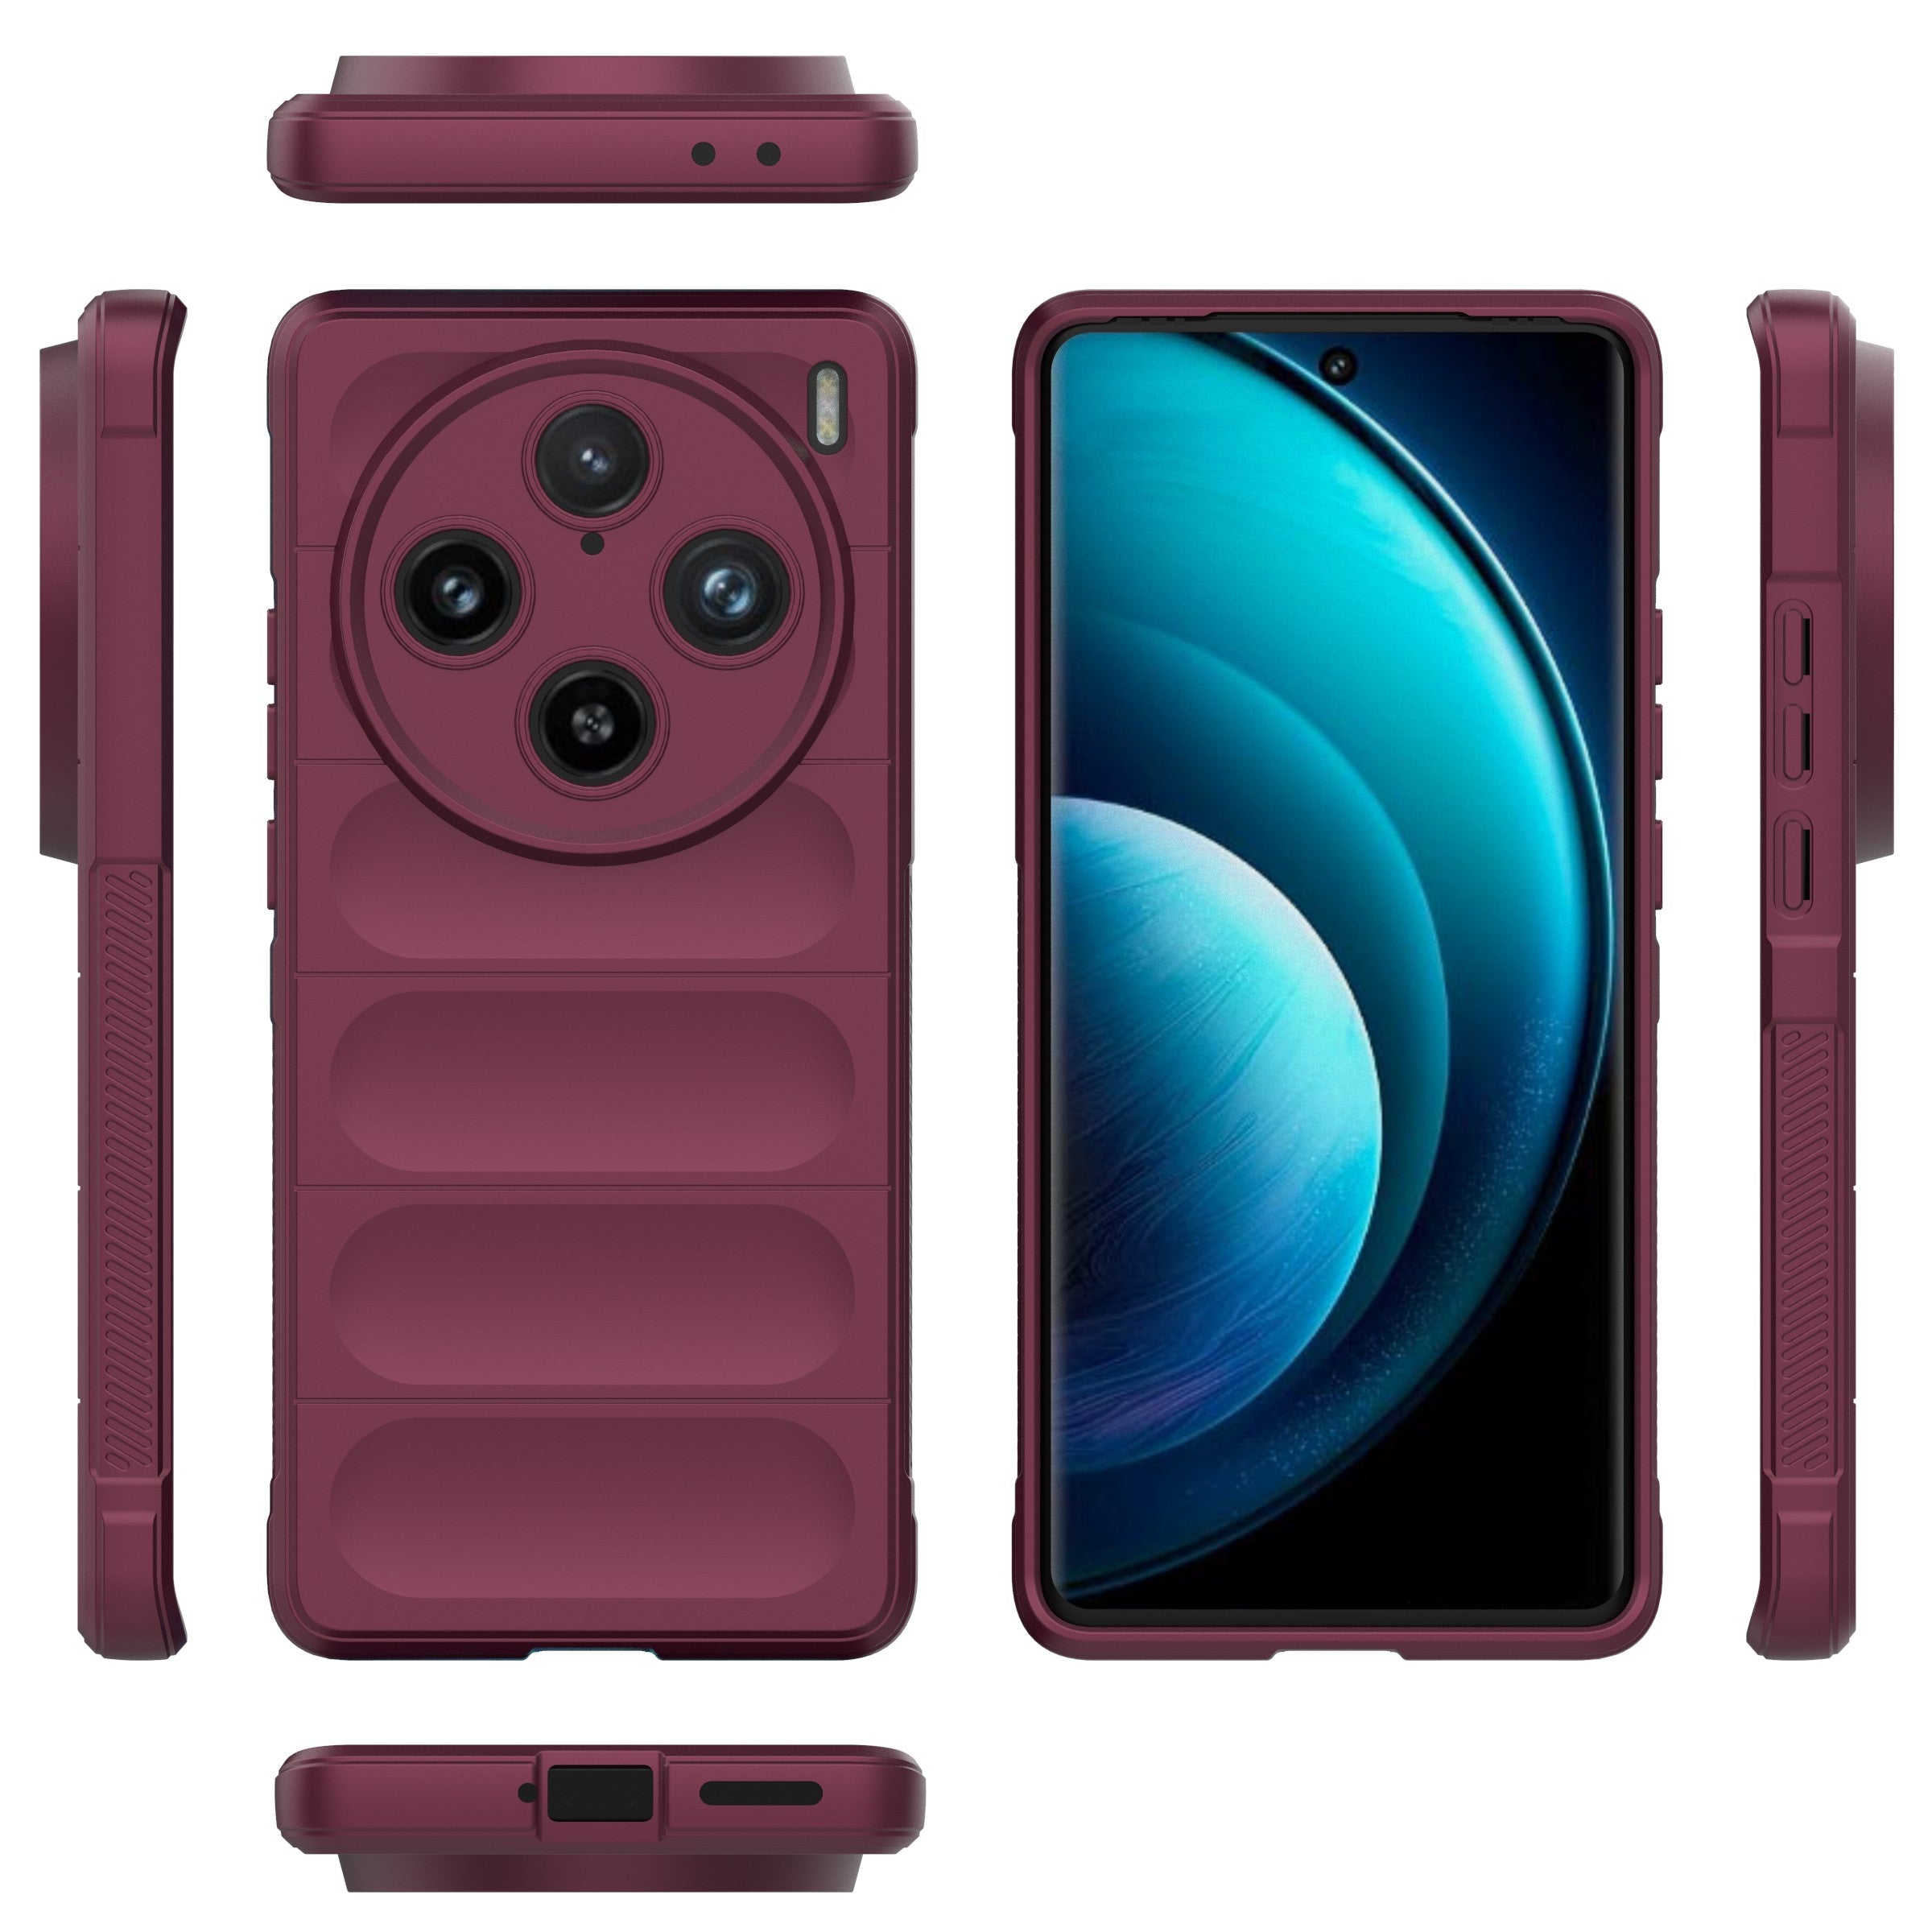 For vivo X100 Pro 5G Case Soft TPU Back Shell Rugged Cell Phone Protector Cover - Wine Red